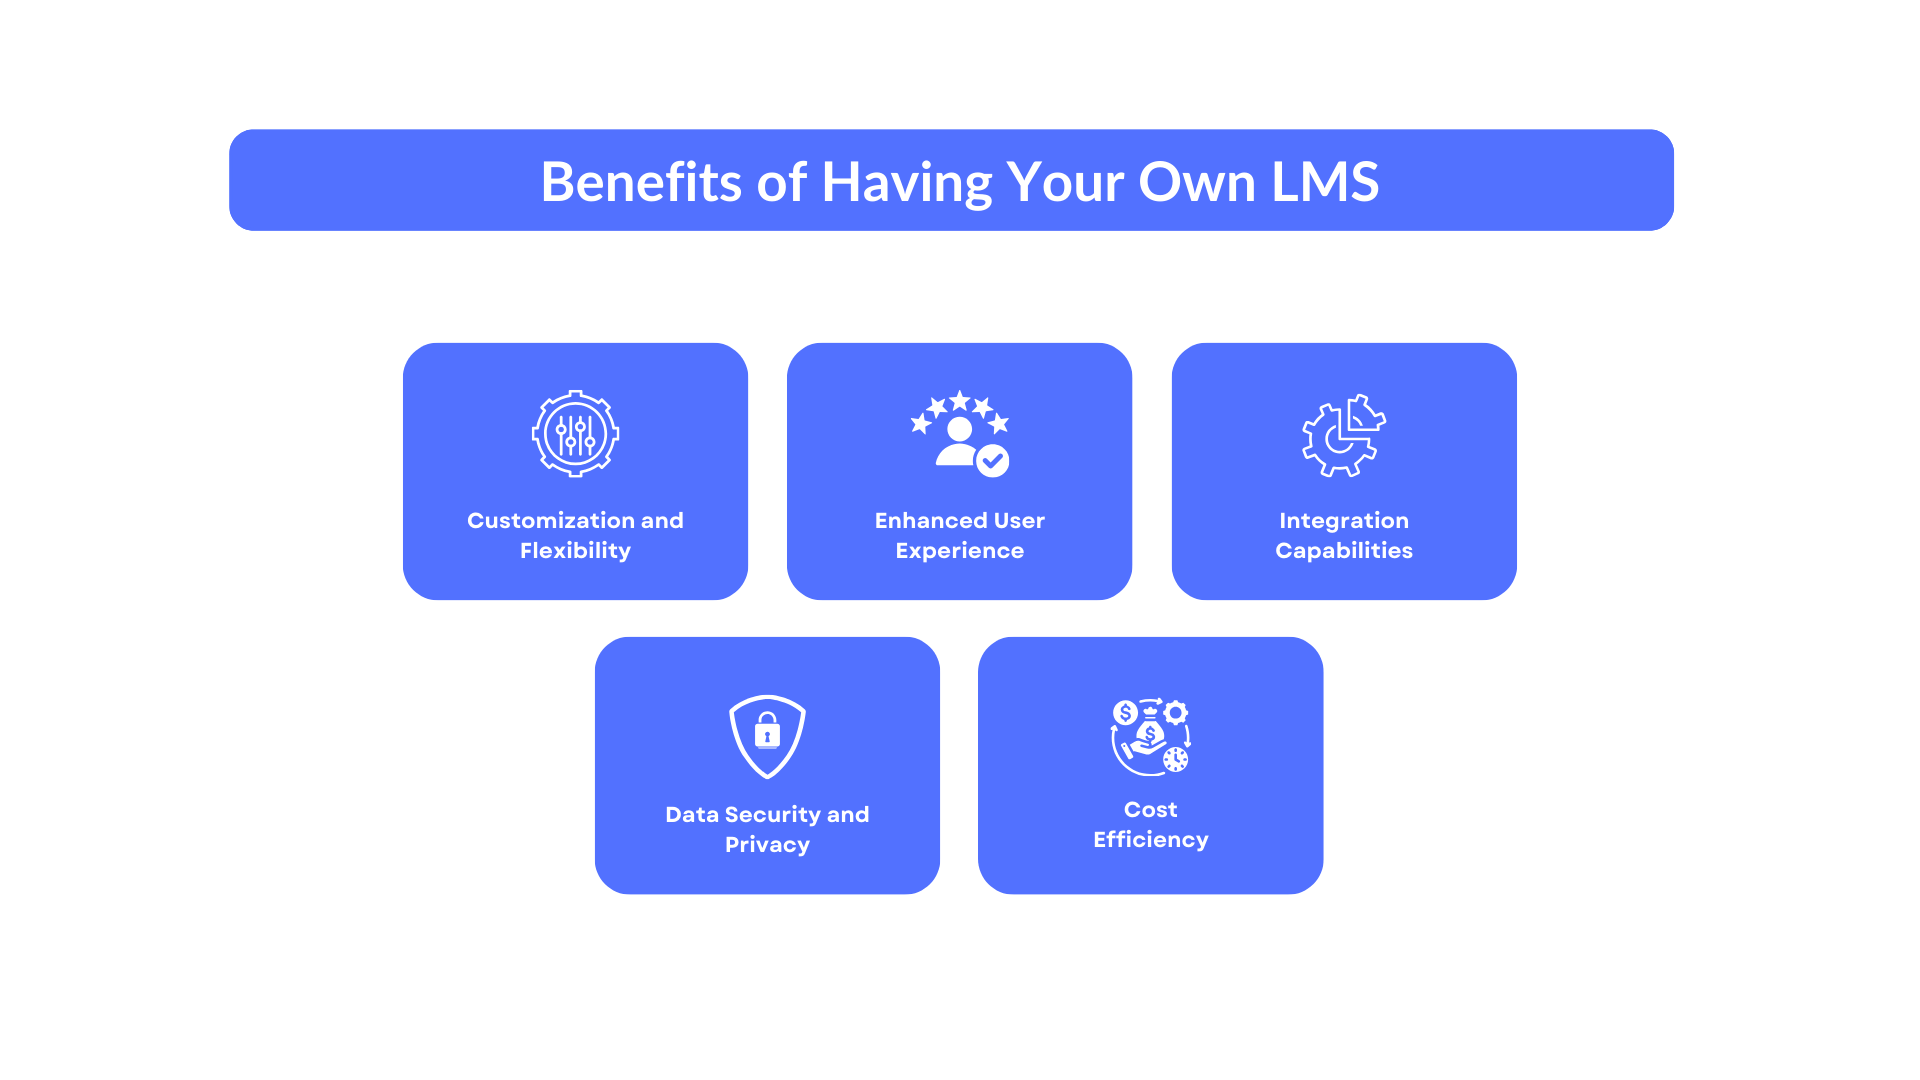 Benefits of Having Your Own LMS